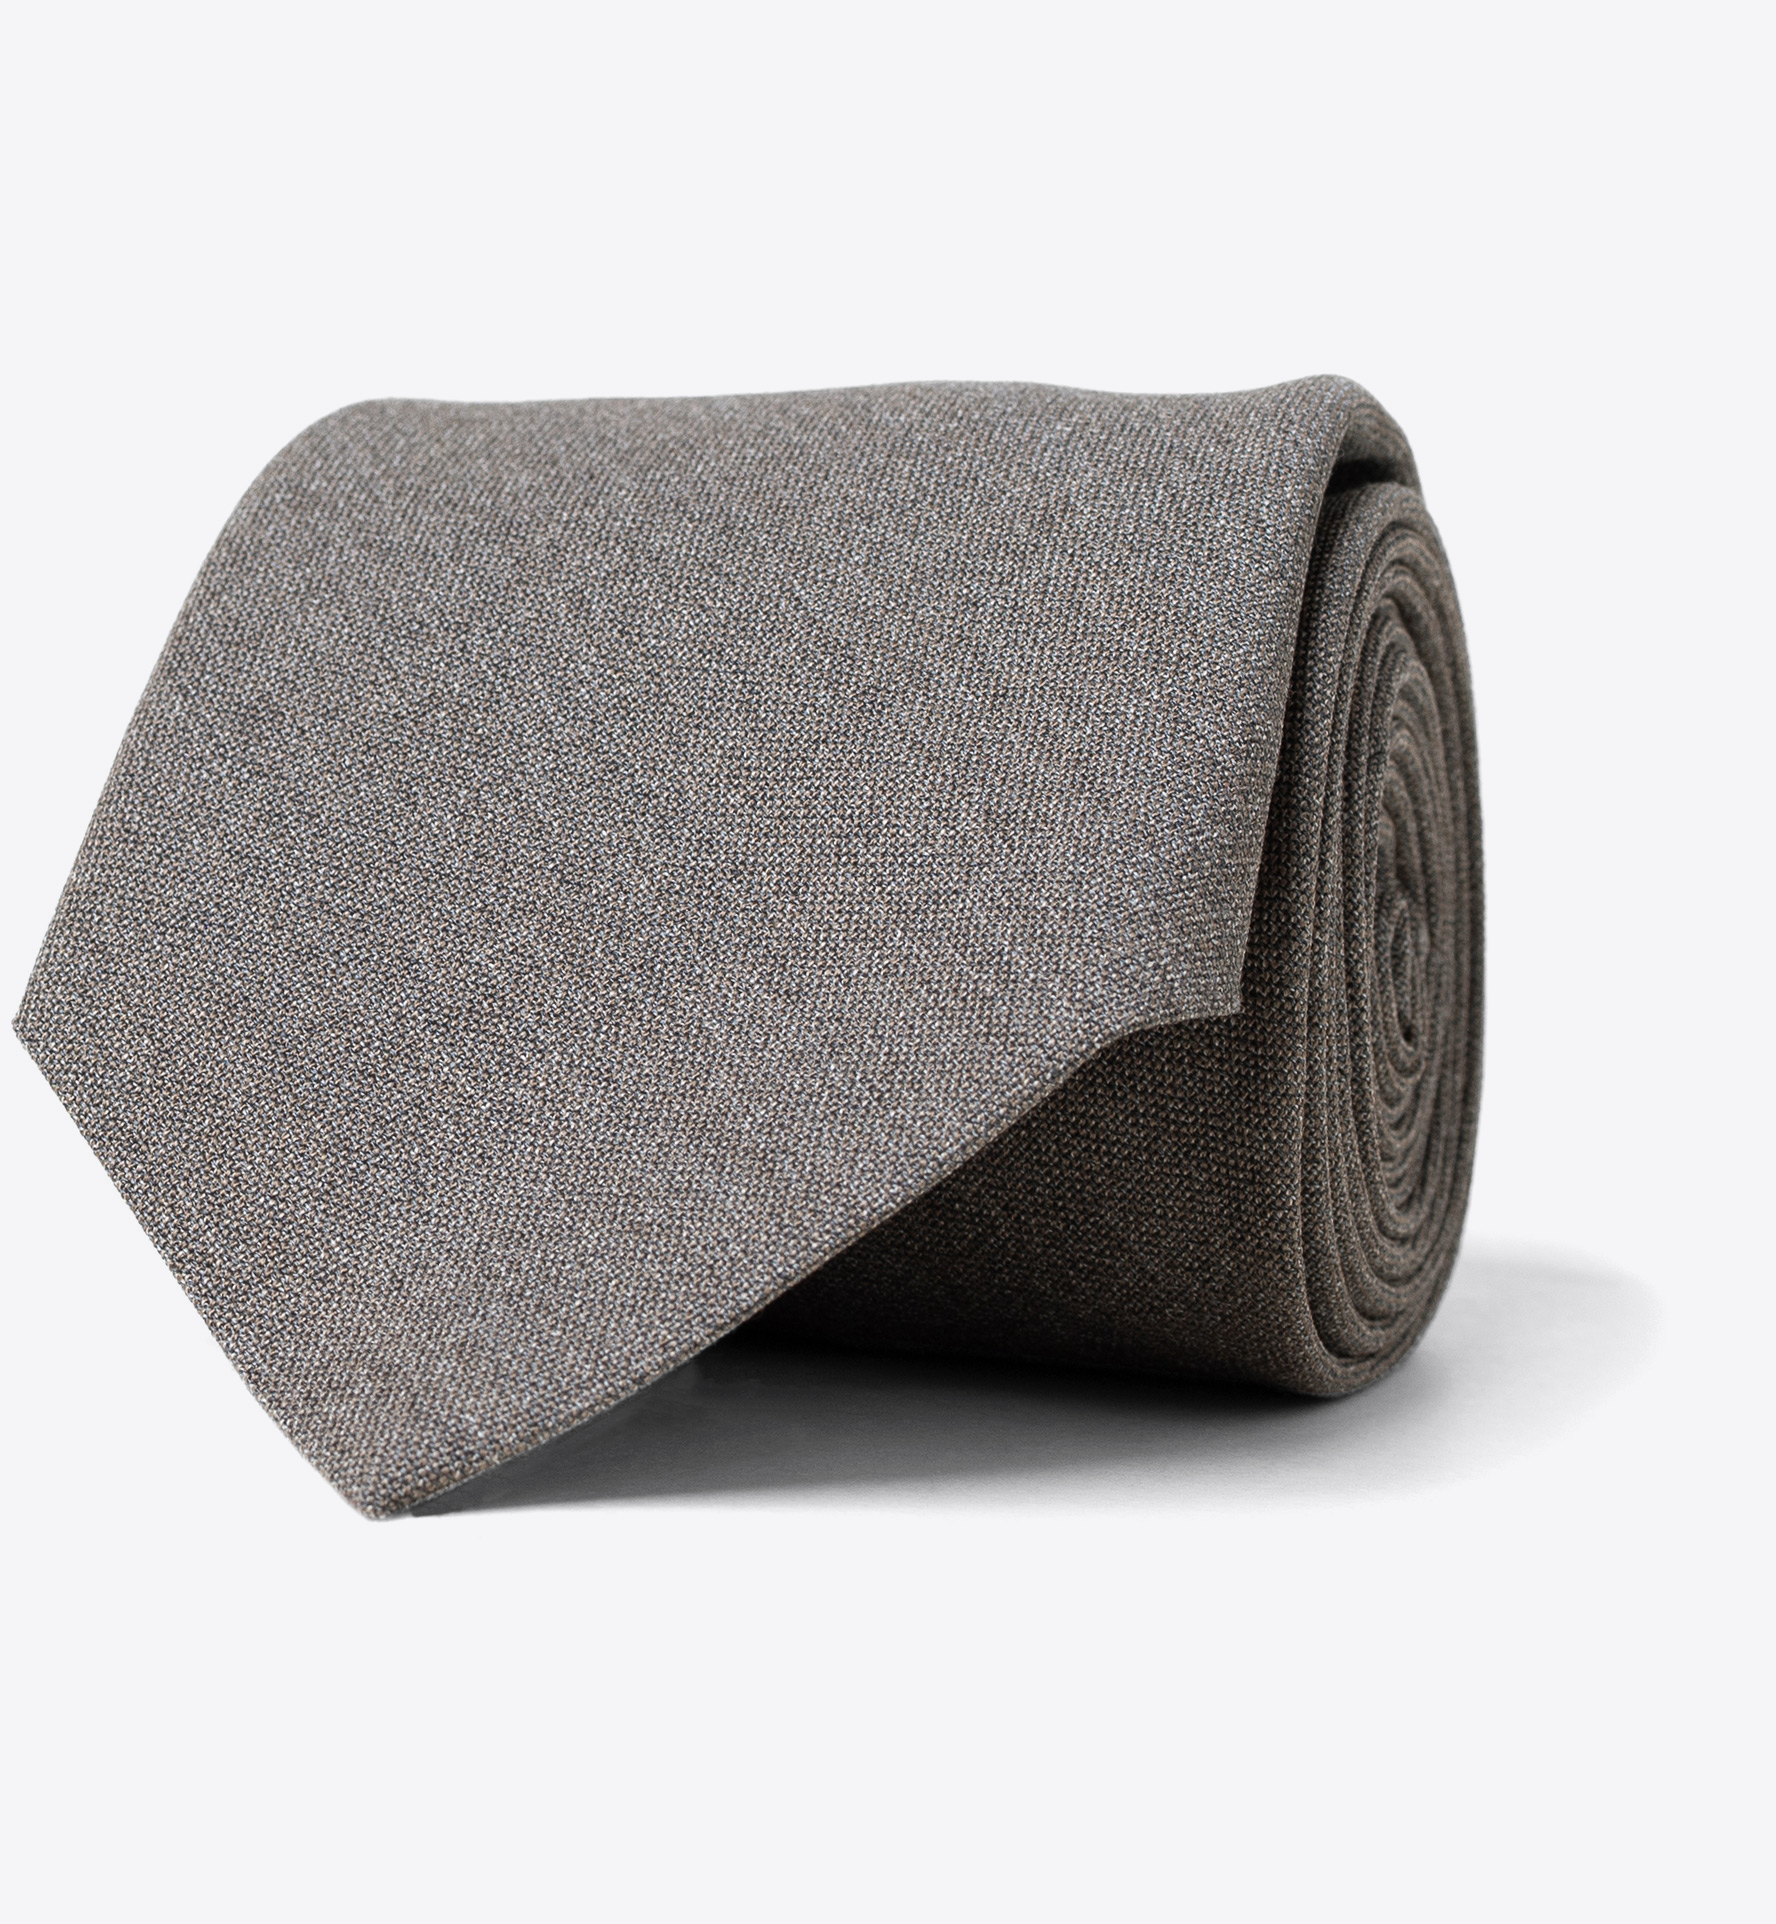 Taupe Fresco Wool Tie by Proper Cloth